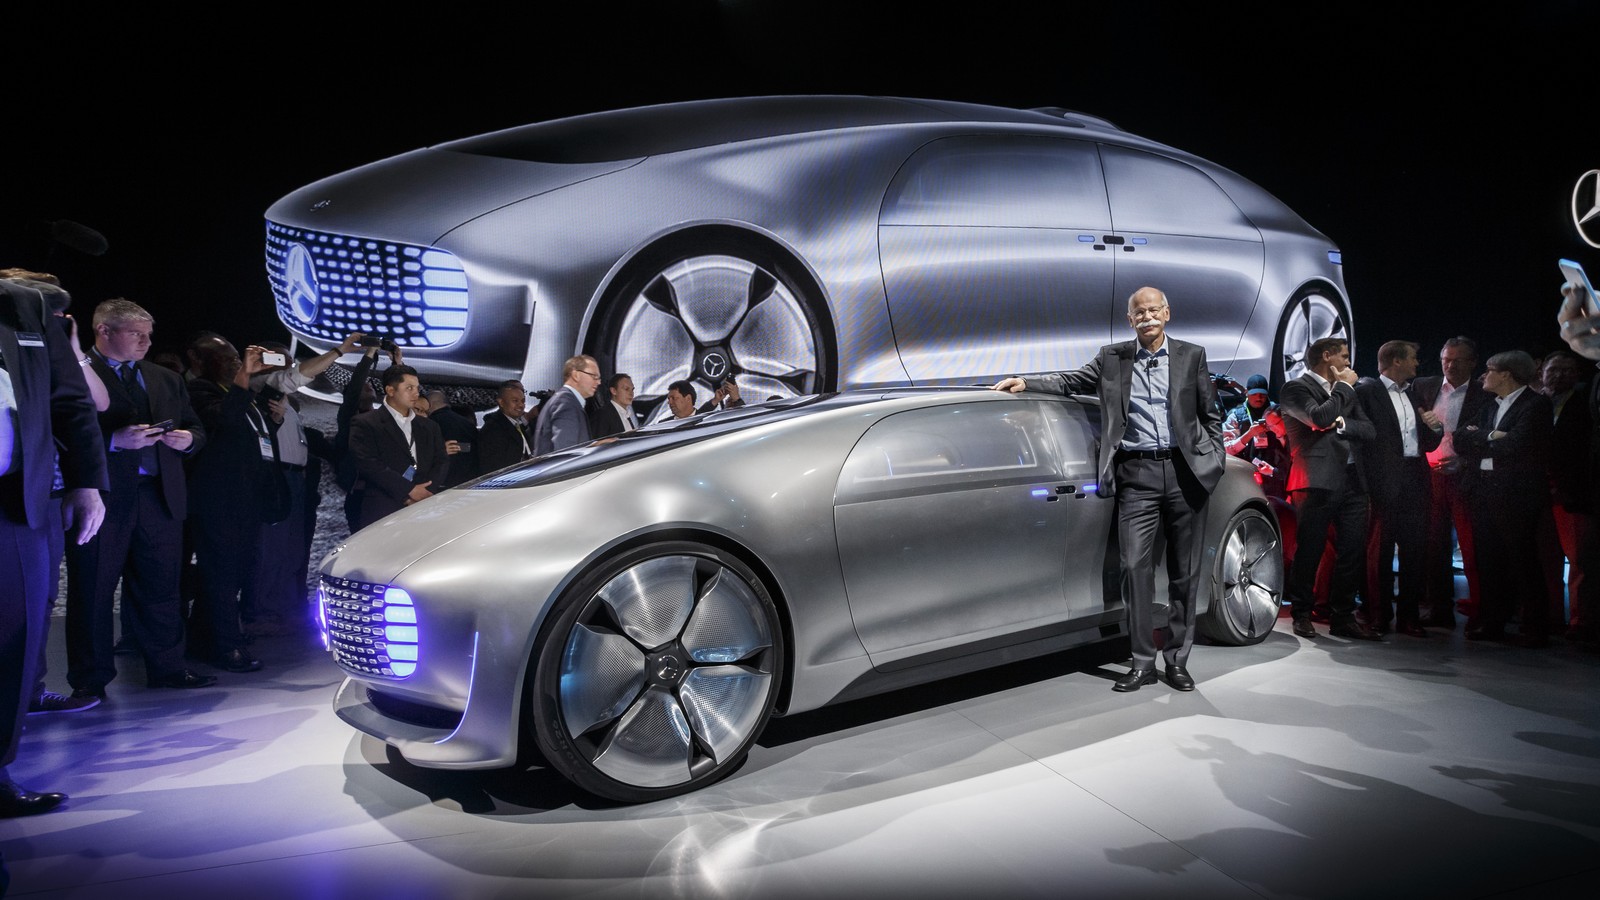 World premiere of the Mercedes-Benz F 015 Luxury in Motion at the CES, Las Vegas 2015Weltpremiere des Mercedes-Benz F 015 Luxury in Motion auf der CES, Las Vegas 2015